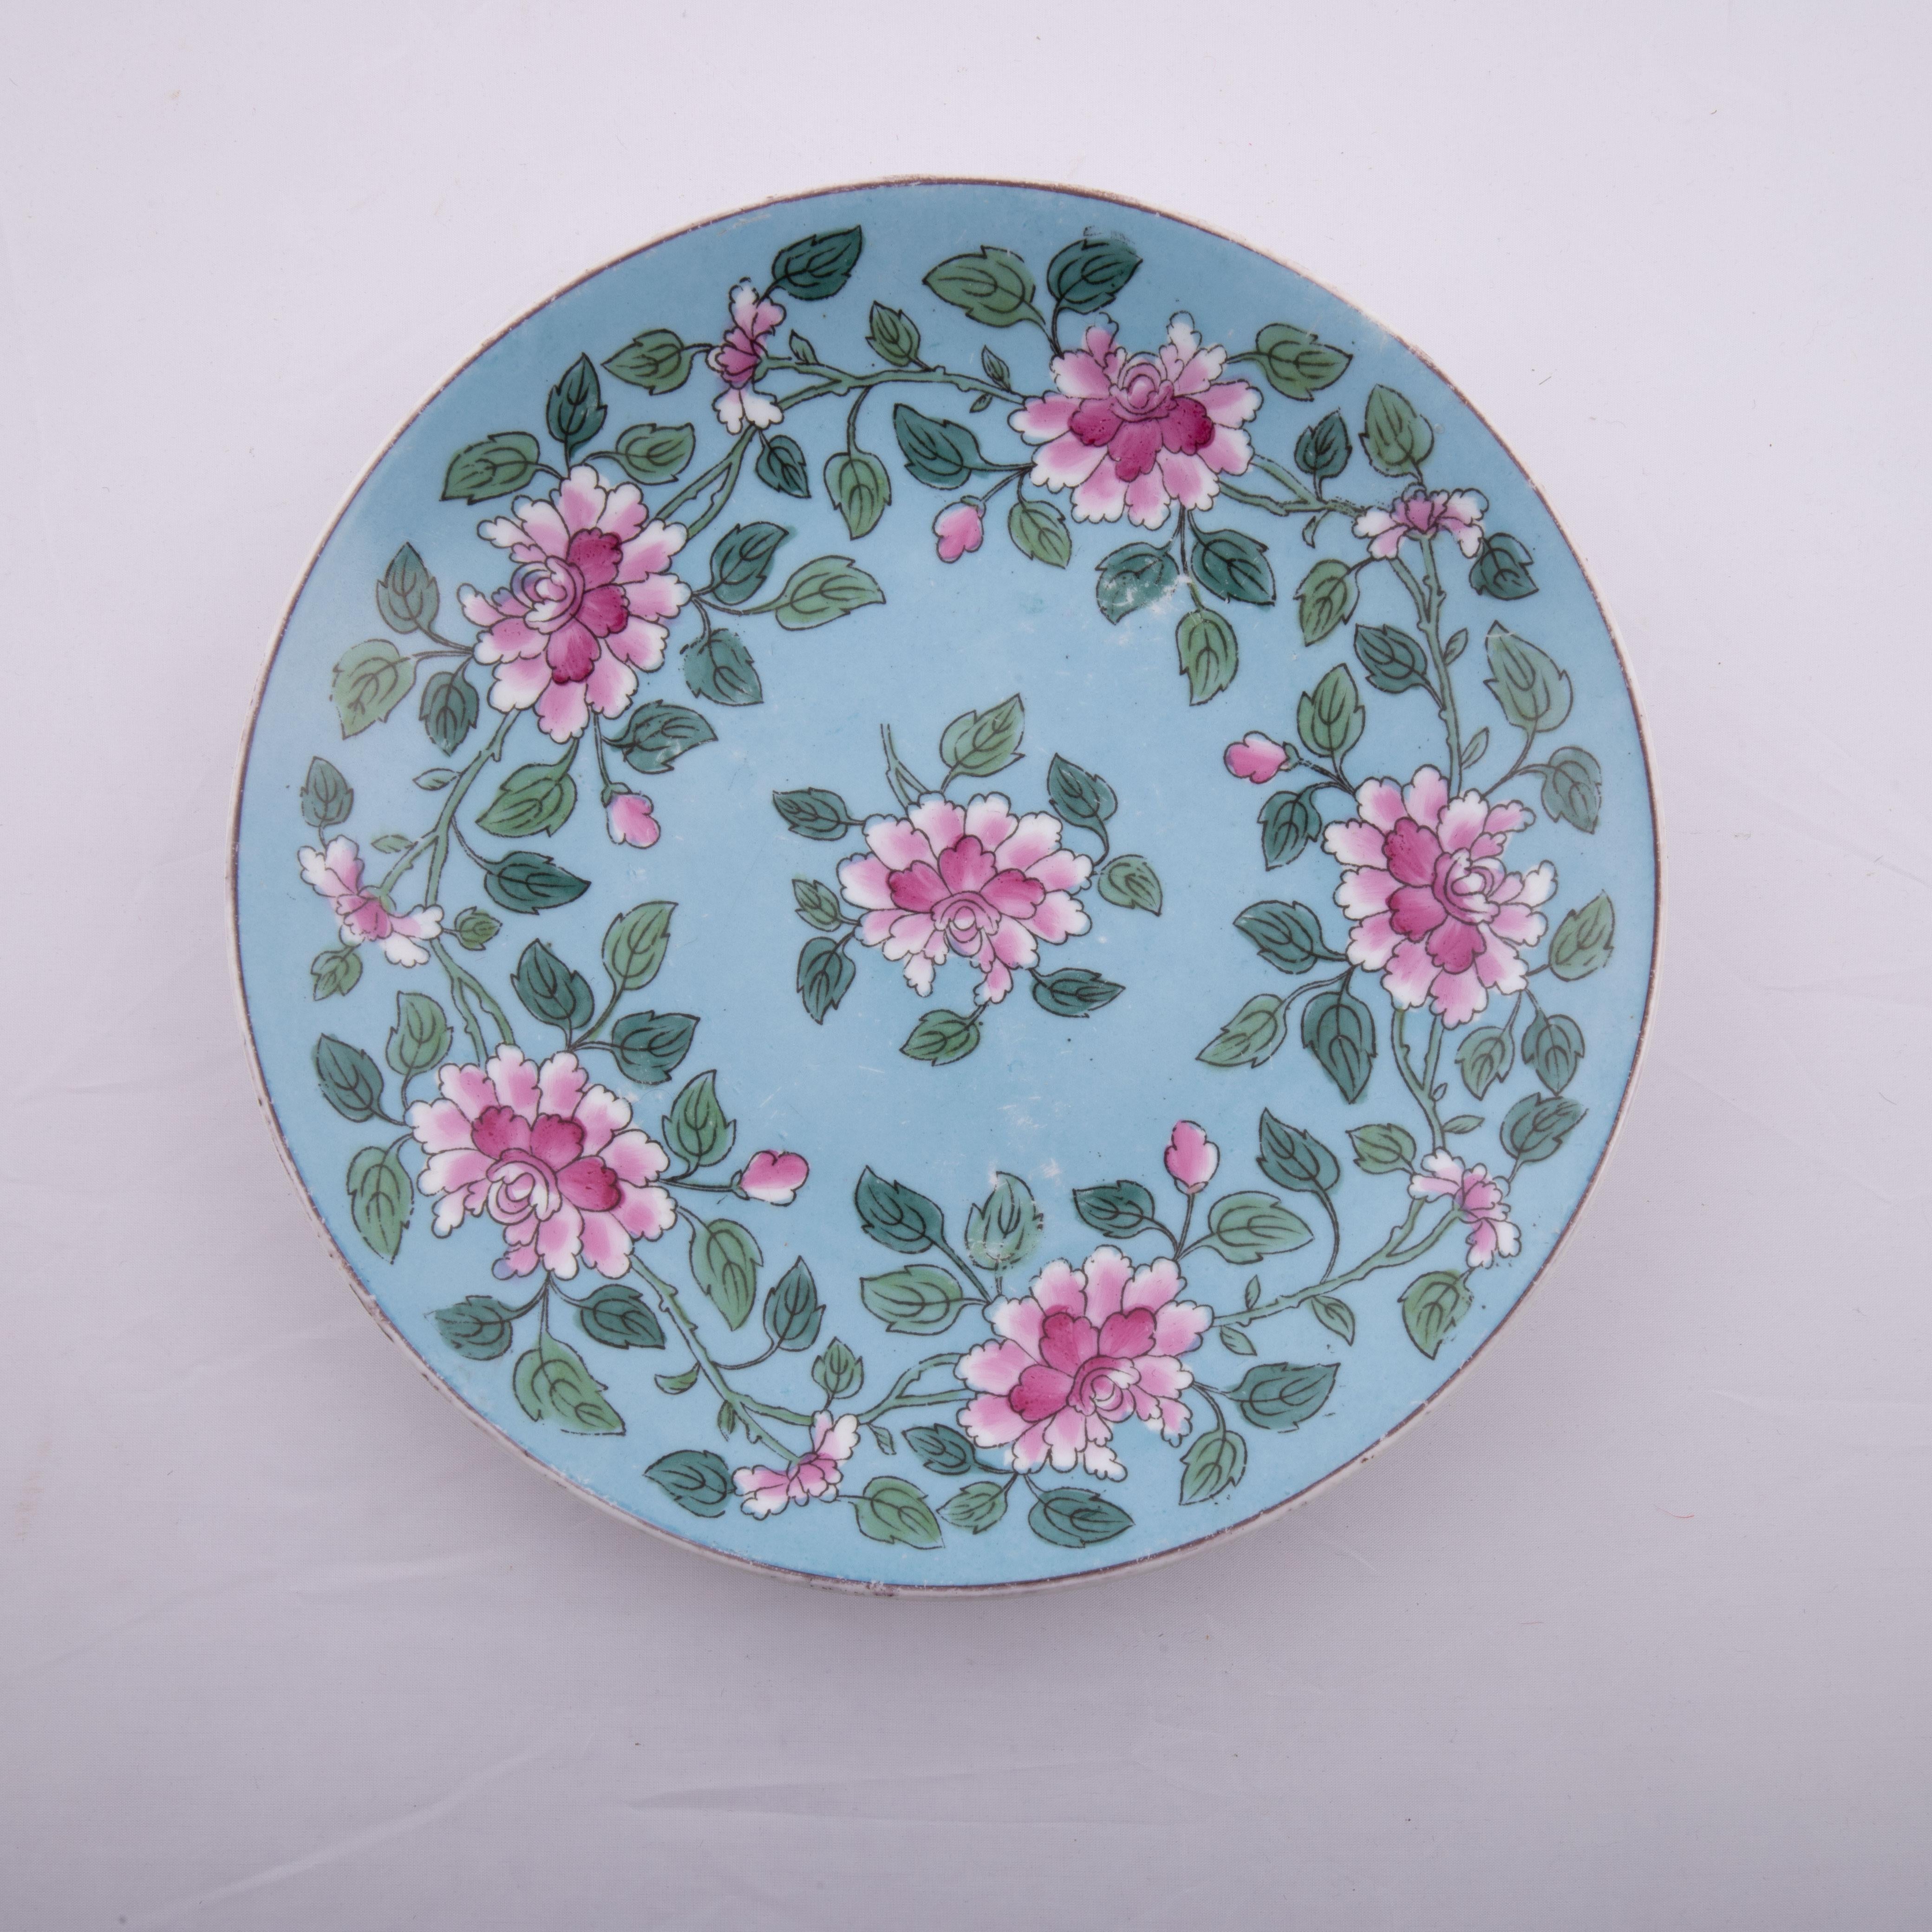 The Kuznetsov factory was in Volkhov, Russia, was established in 1889, one of many owned by the Kuznetsov family, producing faience chiefly for the Ottoman and Central Asian market, where it was much in demand. Their designs were mainly floral and